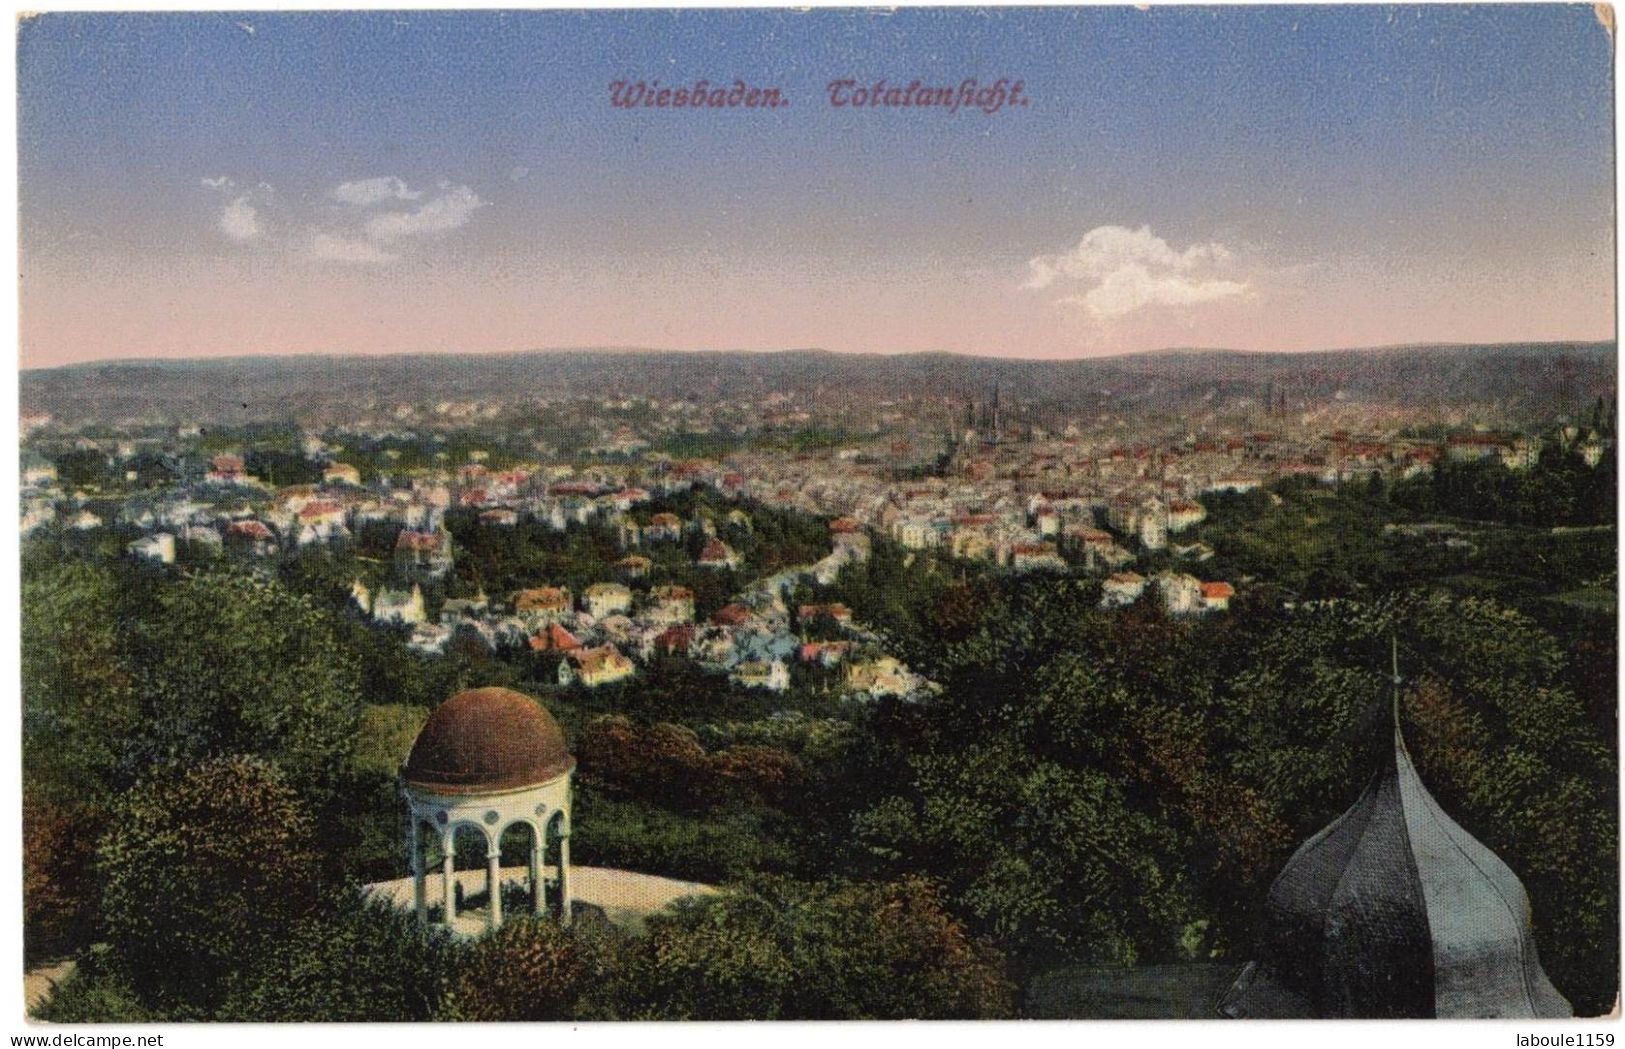 ALLEMAGNE GERMANY HESSE WIESBADEN : TOTALANSICHT - EDITION COLORISEE - Voitures De Tourisme